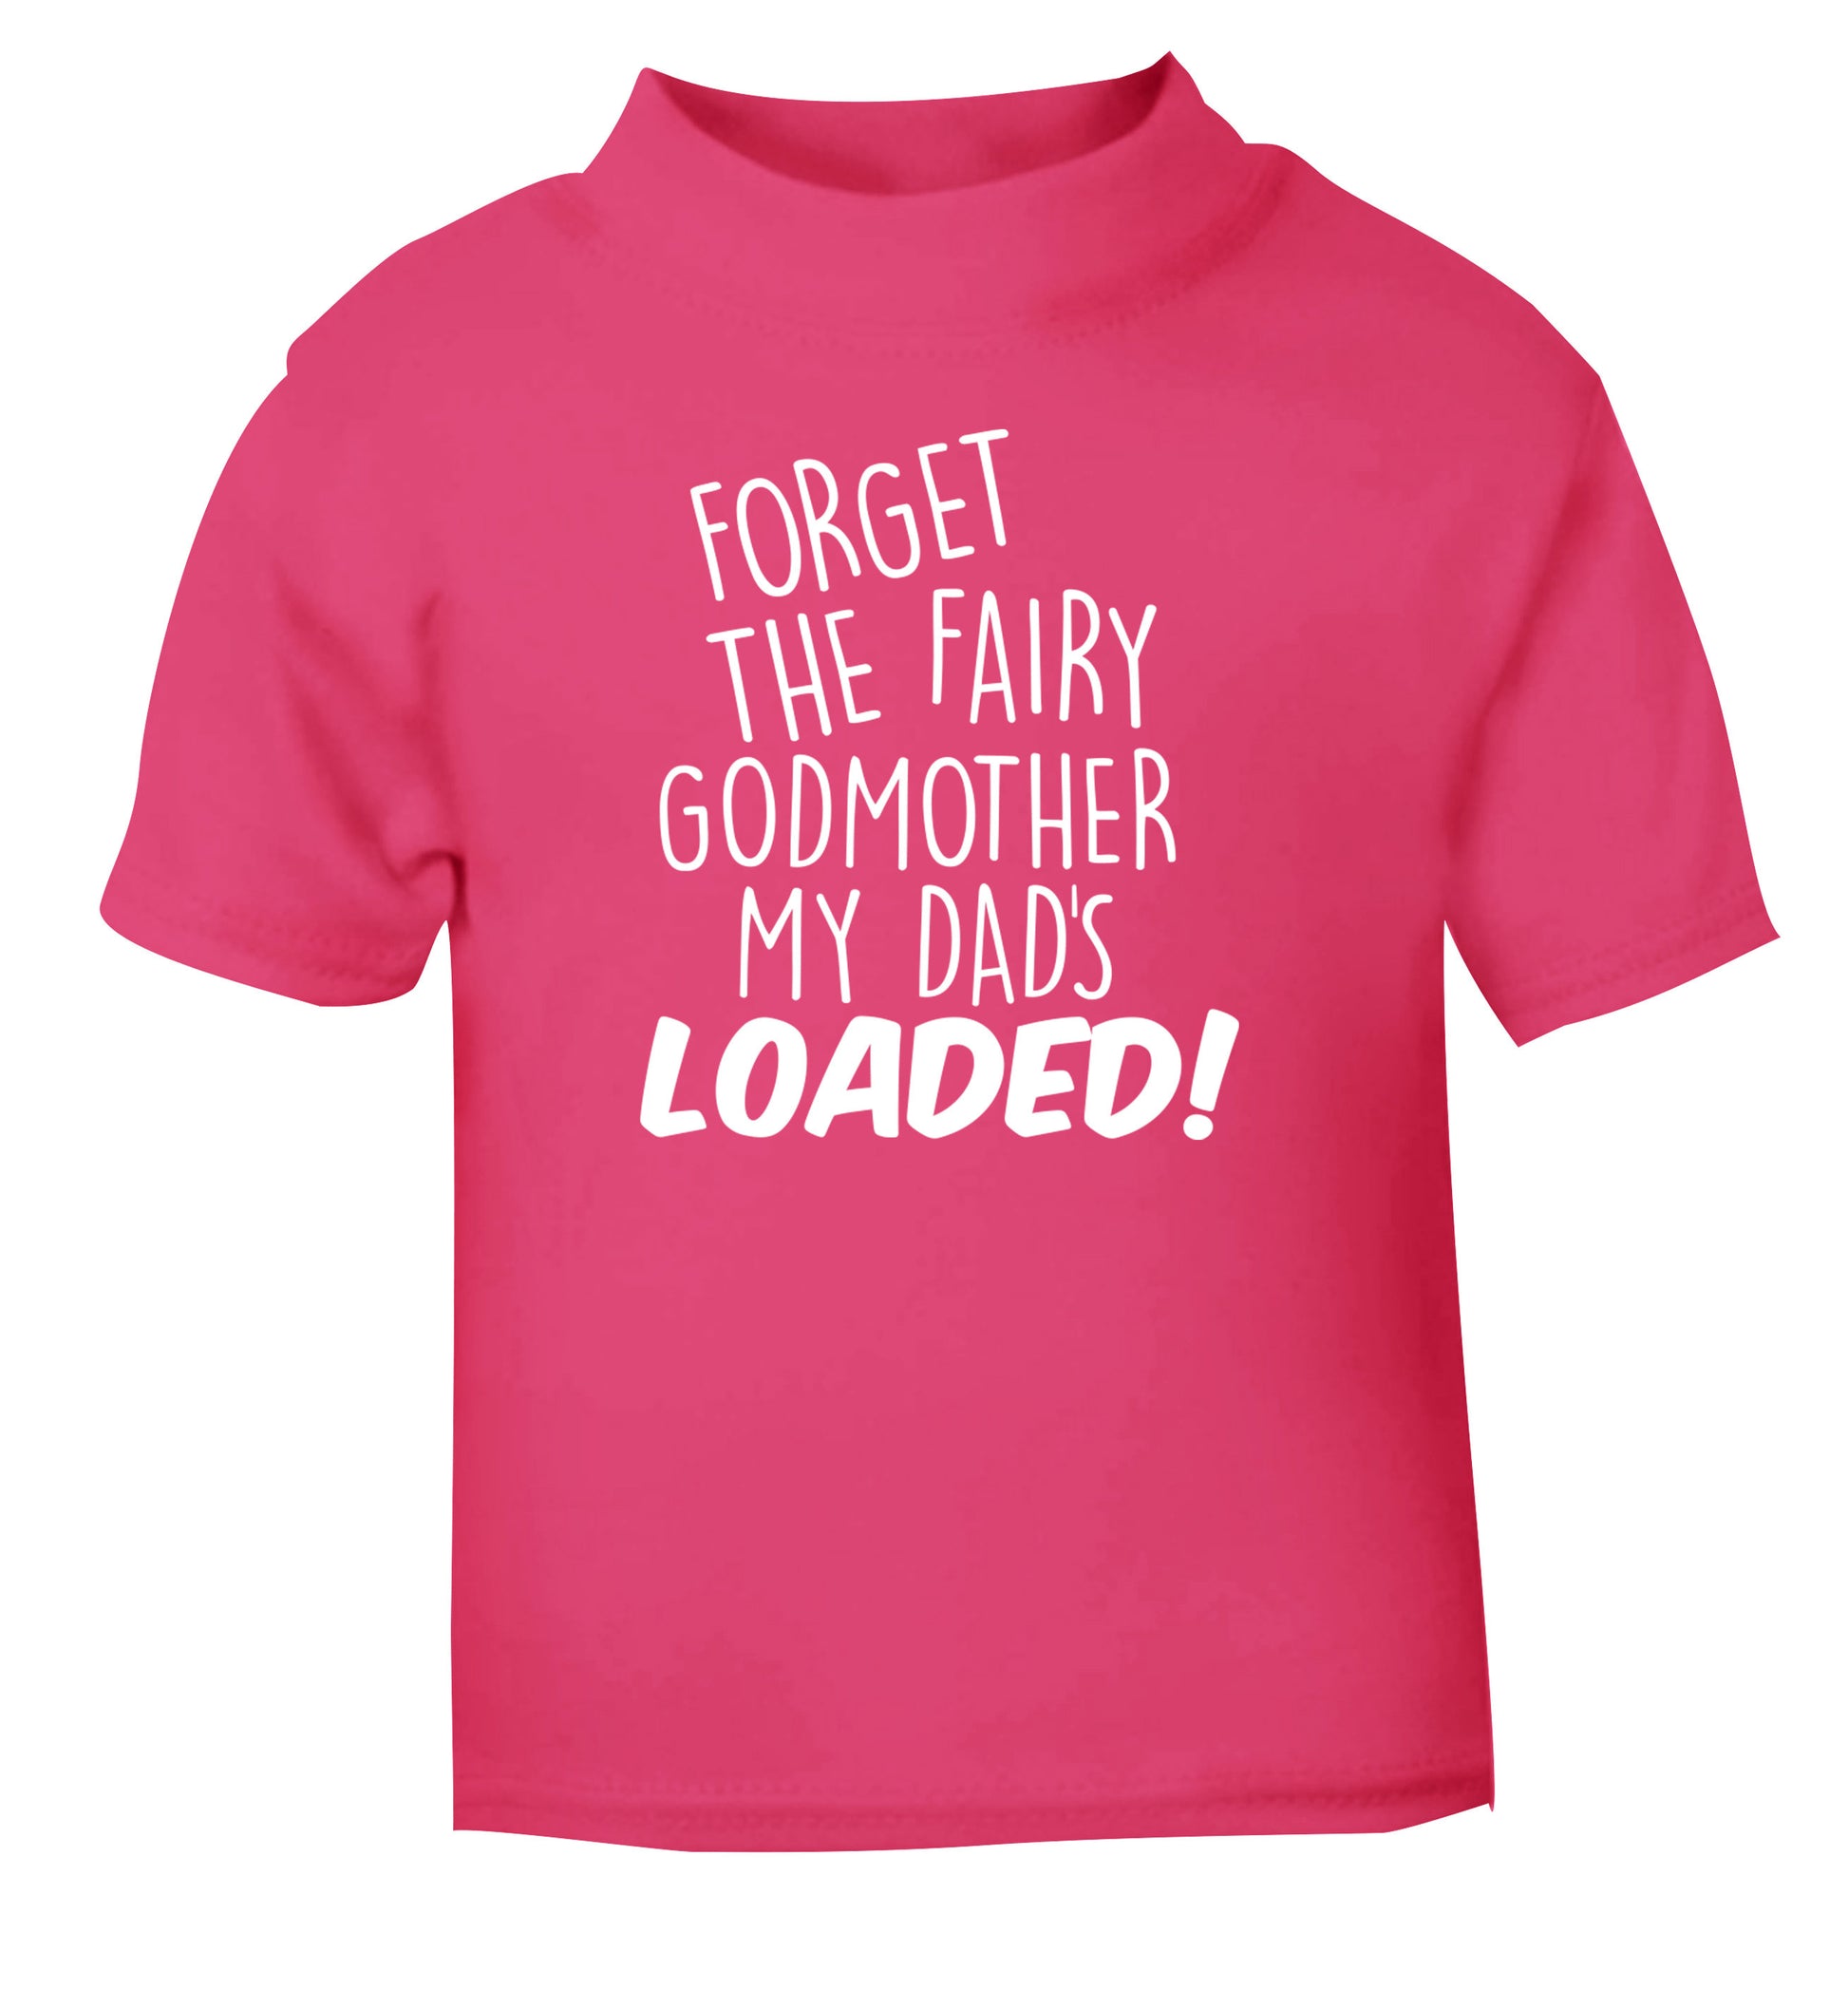 Forget the fairy godmother my dad's loaded pink Baby Toddler Tshirt 2 Years